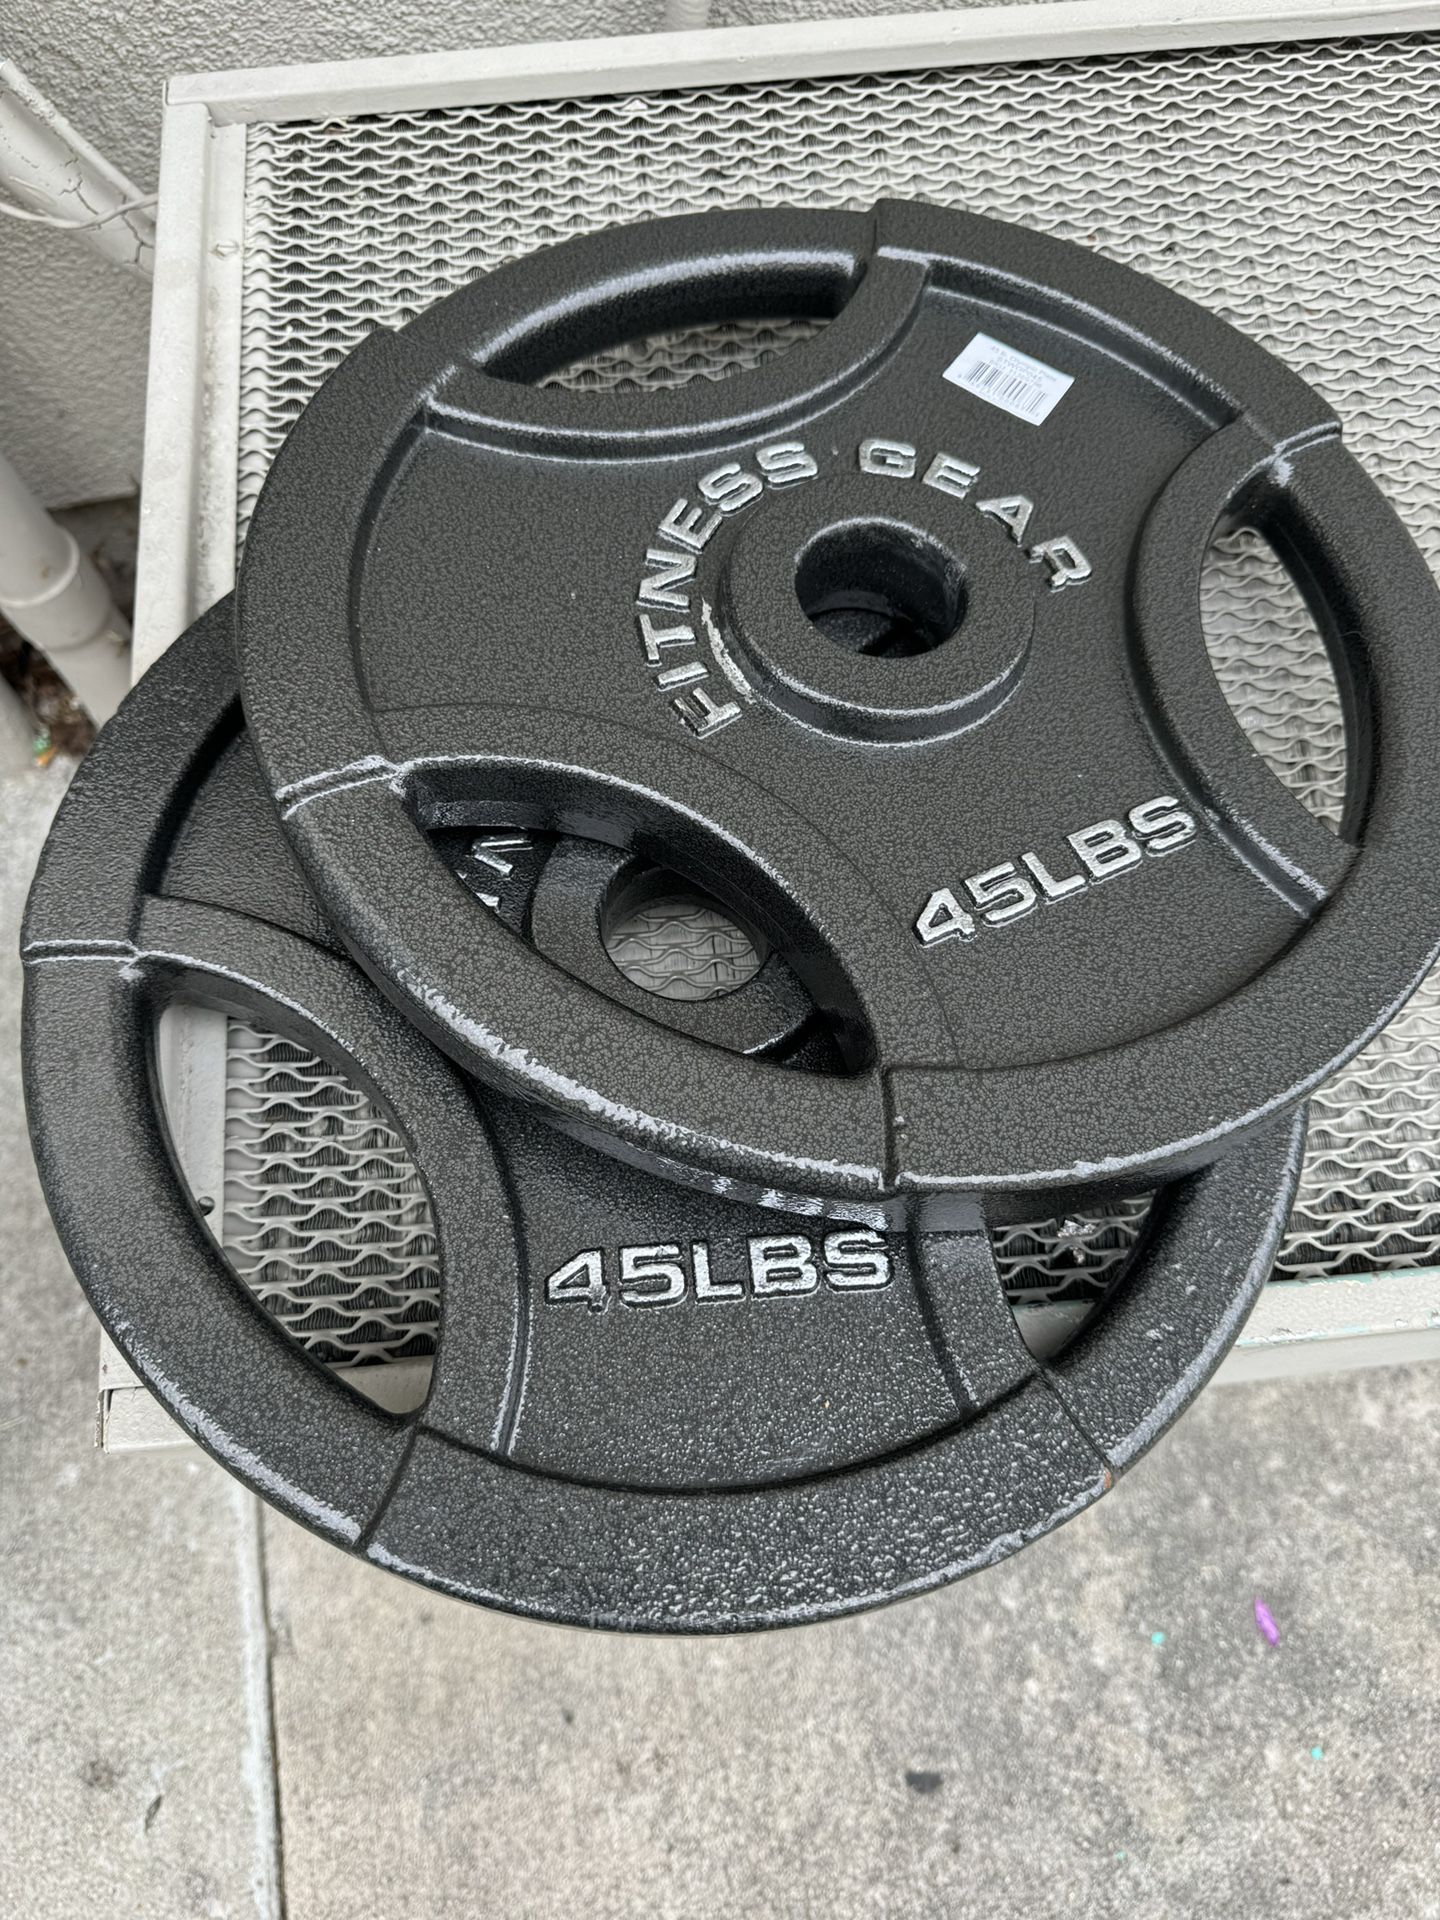 Olympic size weight plates 240 lbs